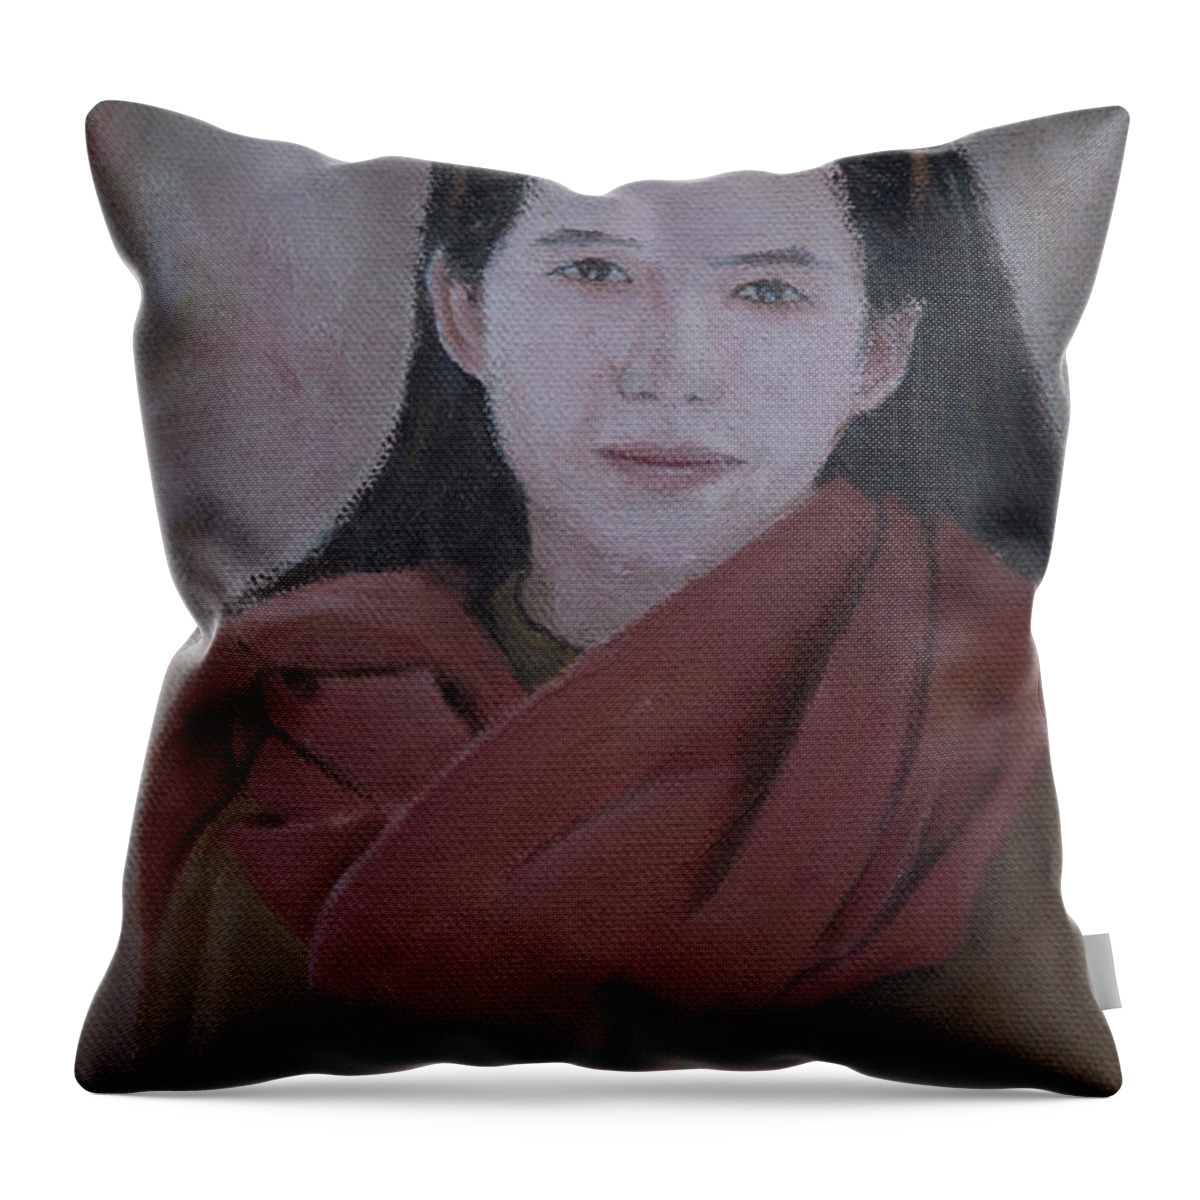 Portrait Throw Pillow featuring the painting Woman With Scarf by Masami Iida